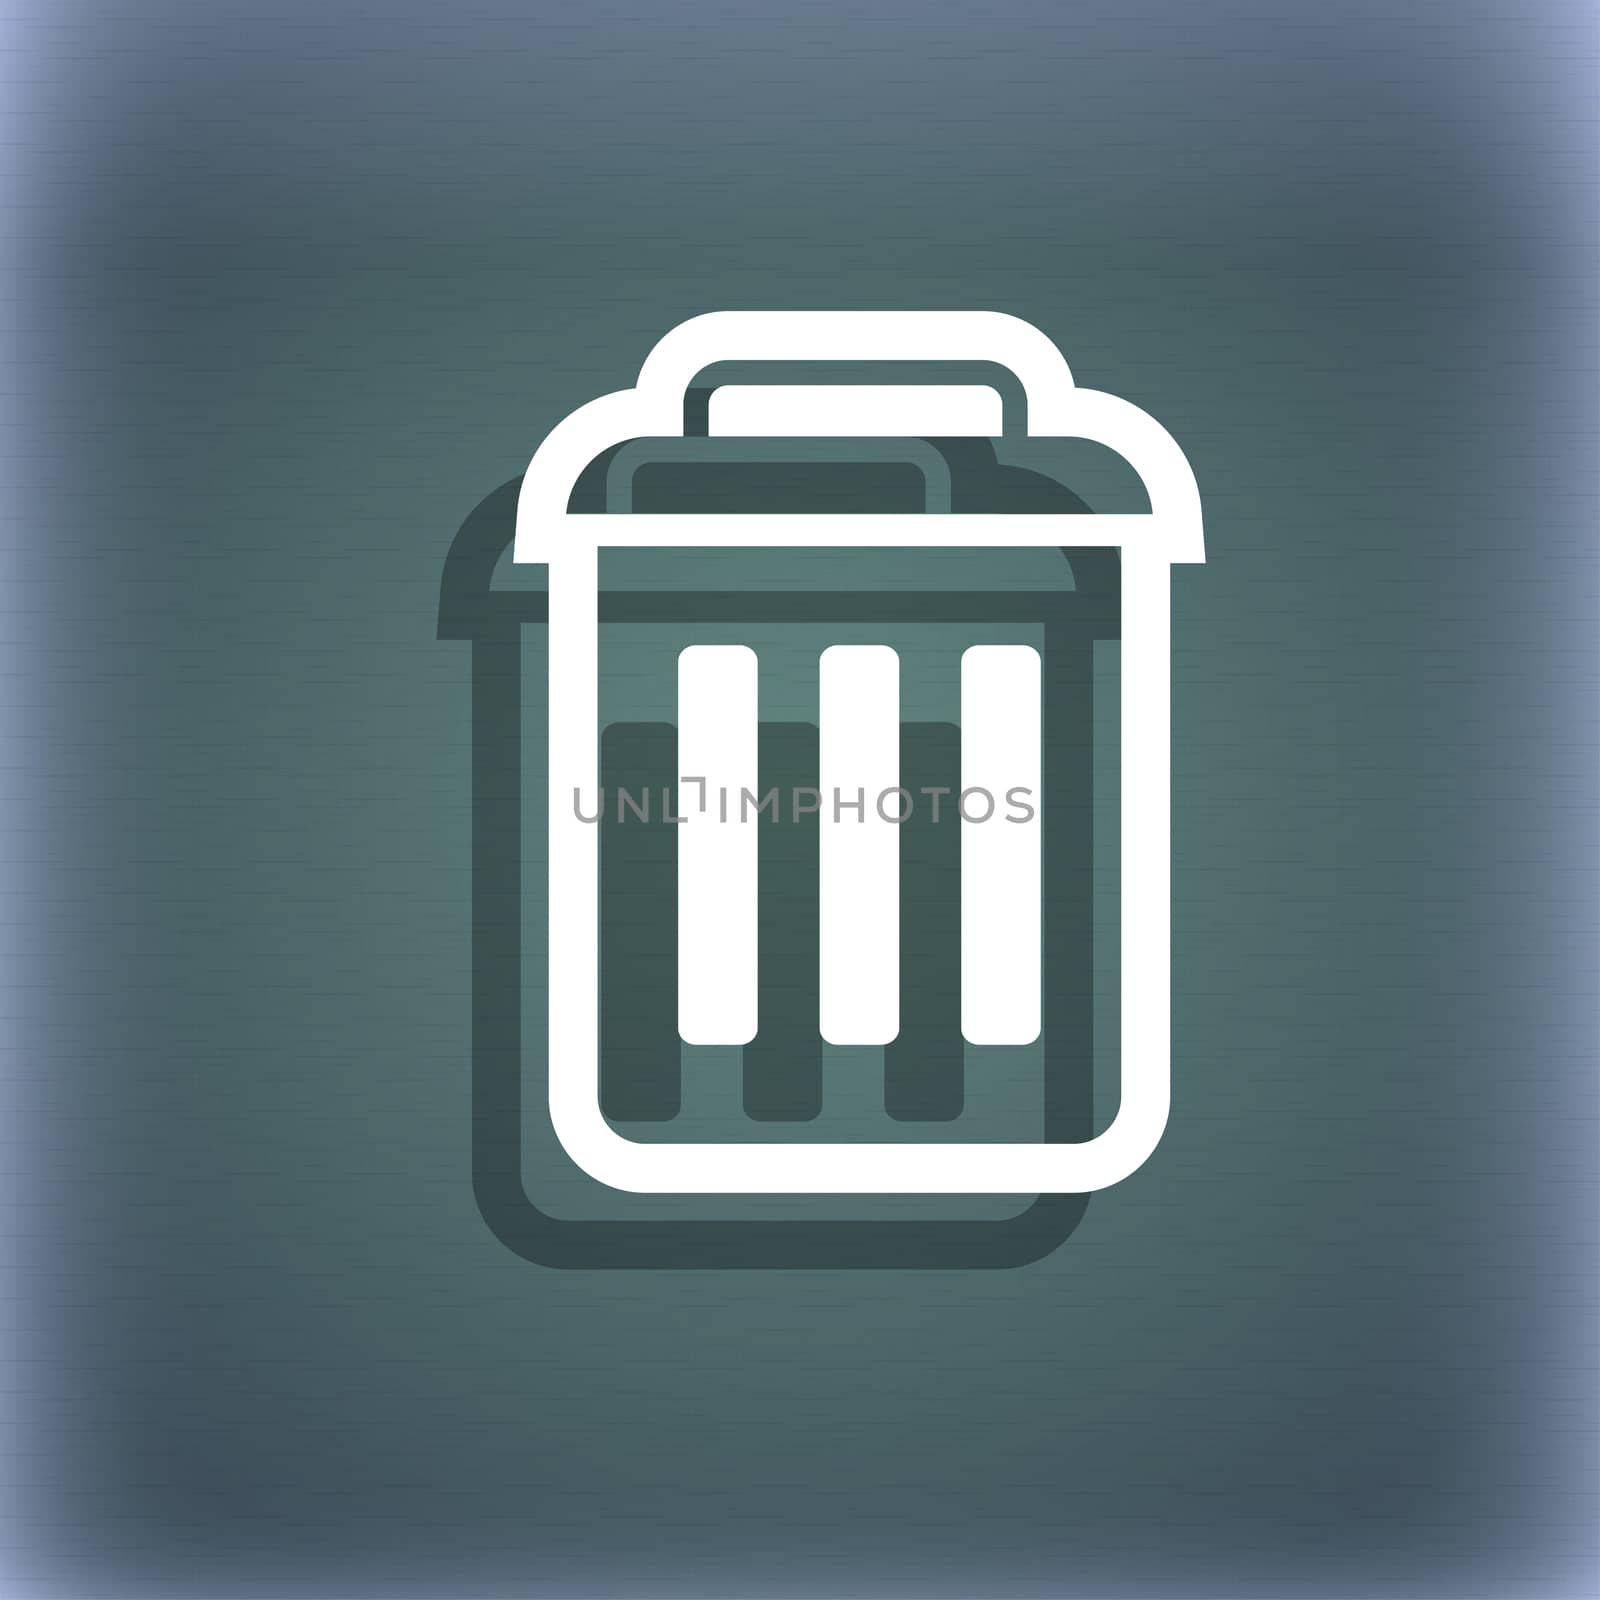 the trash icon symbol on the blue-green abstract background with shadow and space for your text. illustration